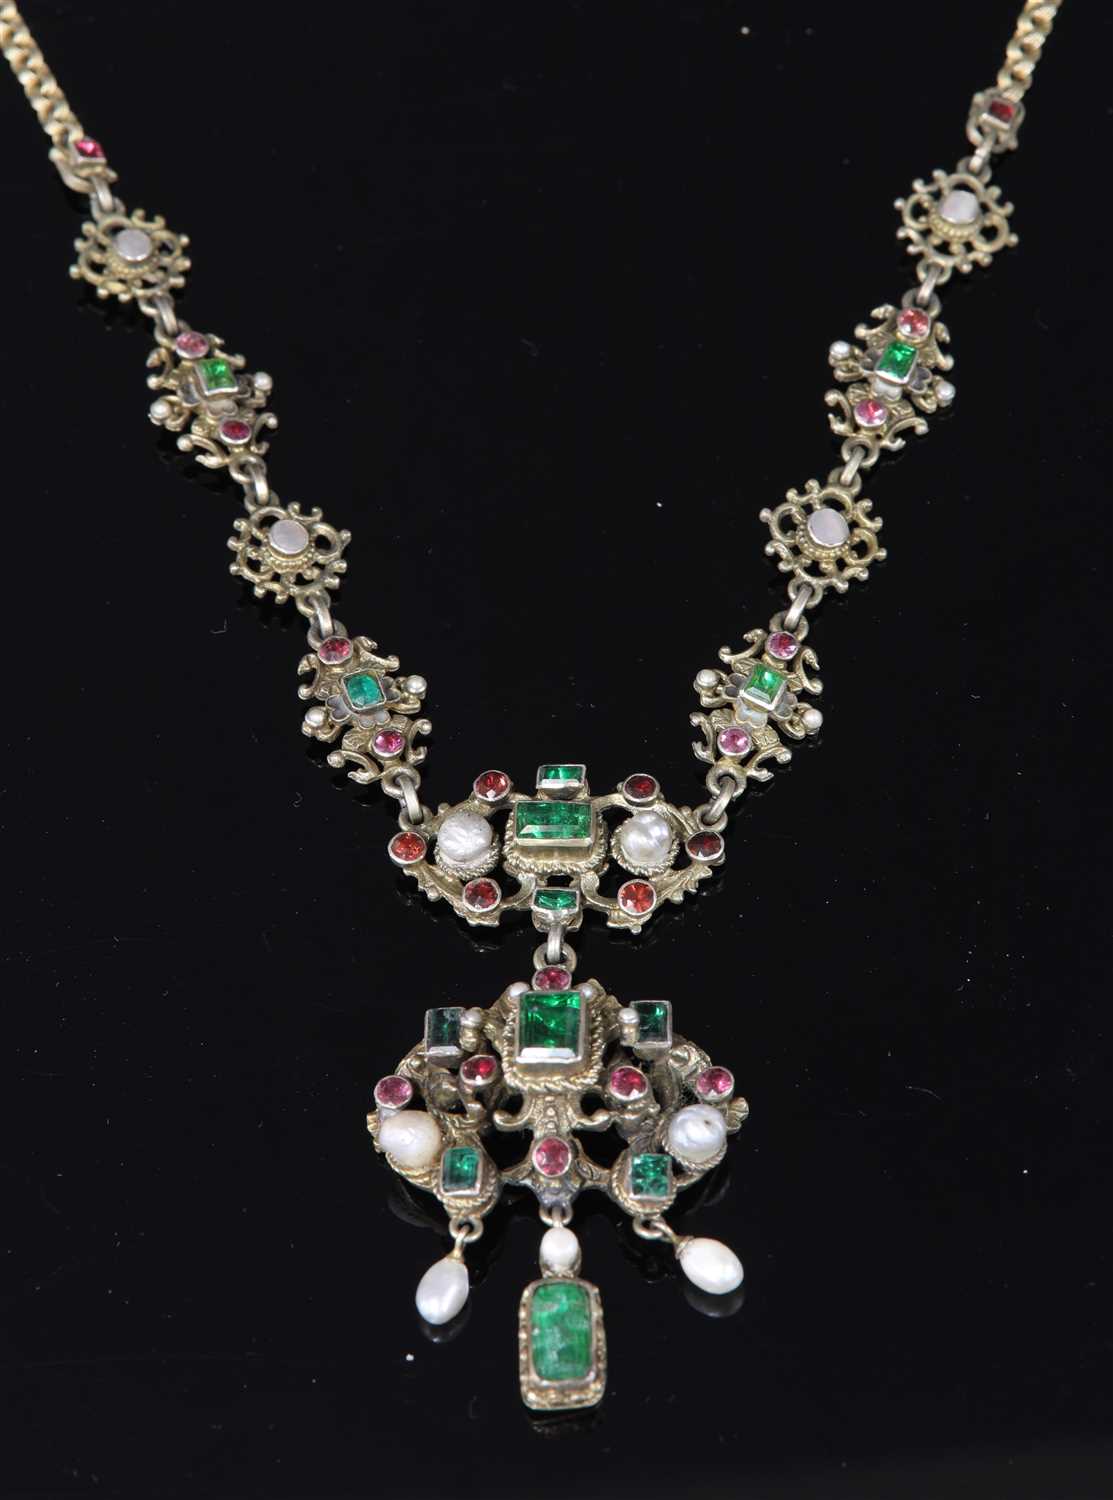 Lot 115 - An early 20th century Austro-Hungarian silver gilt gem set necklace, c.1905